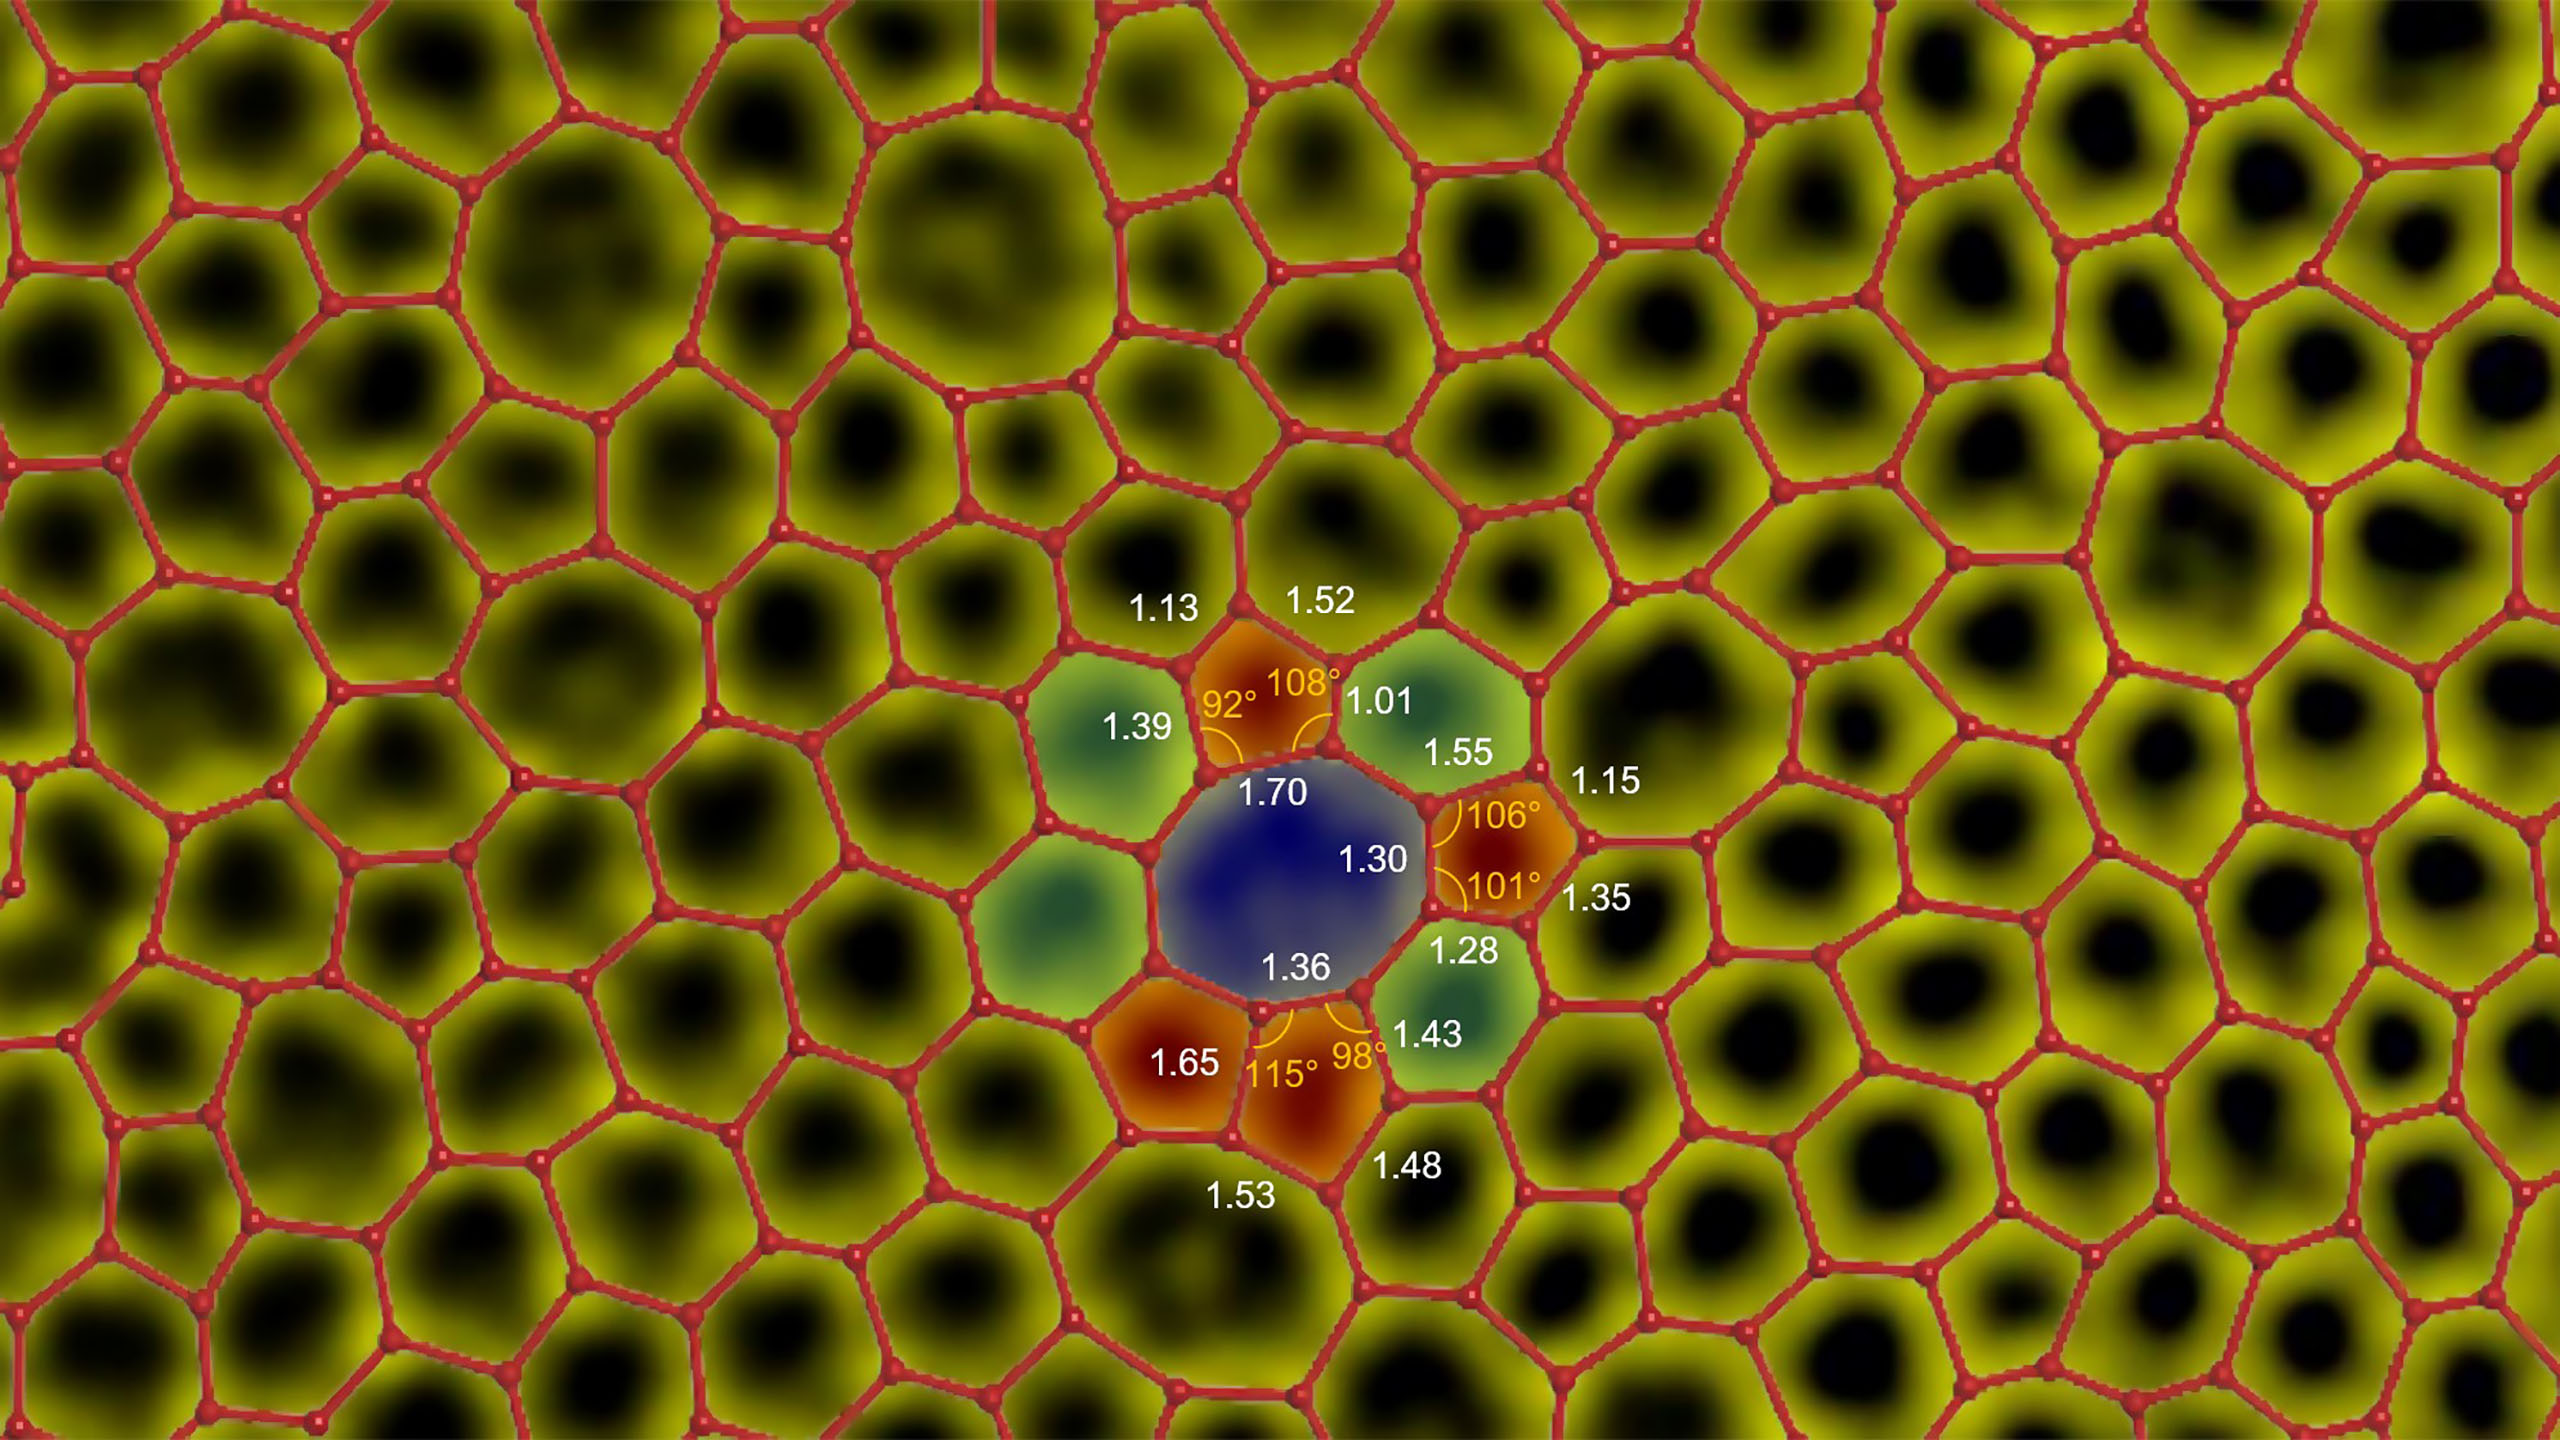 <div>Researchers at NUS Physics, CA2DM and Materials Science and Engineering have created the world’s first atomically thin amorphous carbon film. The amorphous structure has widely varying</div><div>atom-to-atom distance unlike crystals. This is because of the random arrangement of five-, six-, seven- and eight-carbon rings in a planar carbon network, leading to a wide distribution of bond lengths (in Å)</div><div>and bond angles</div>